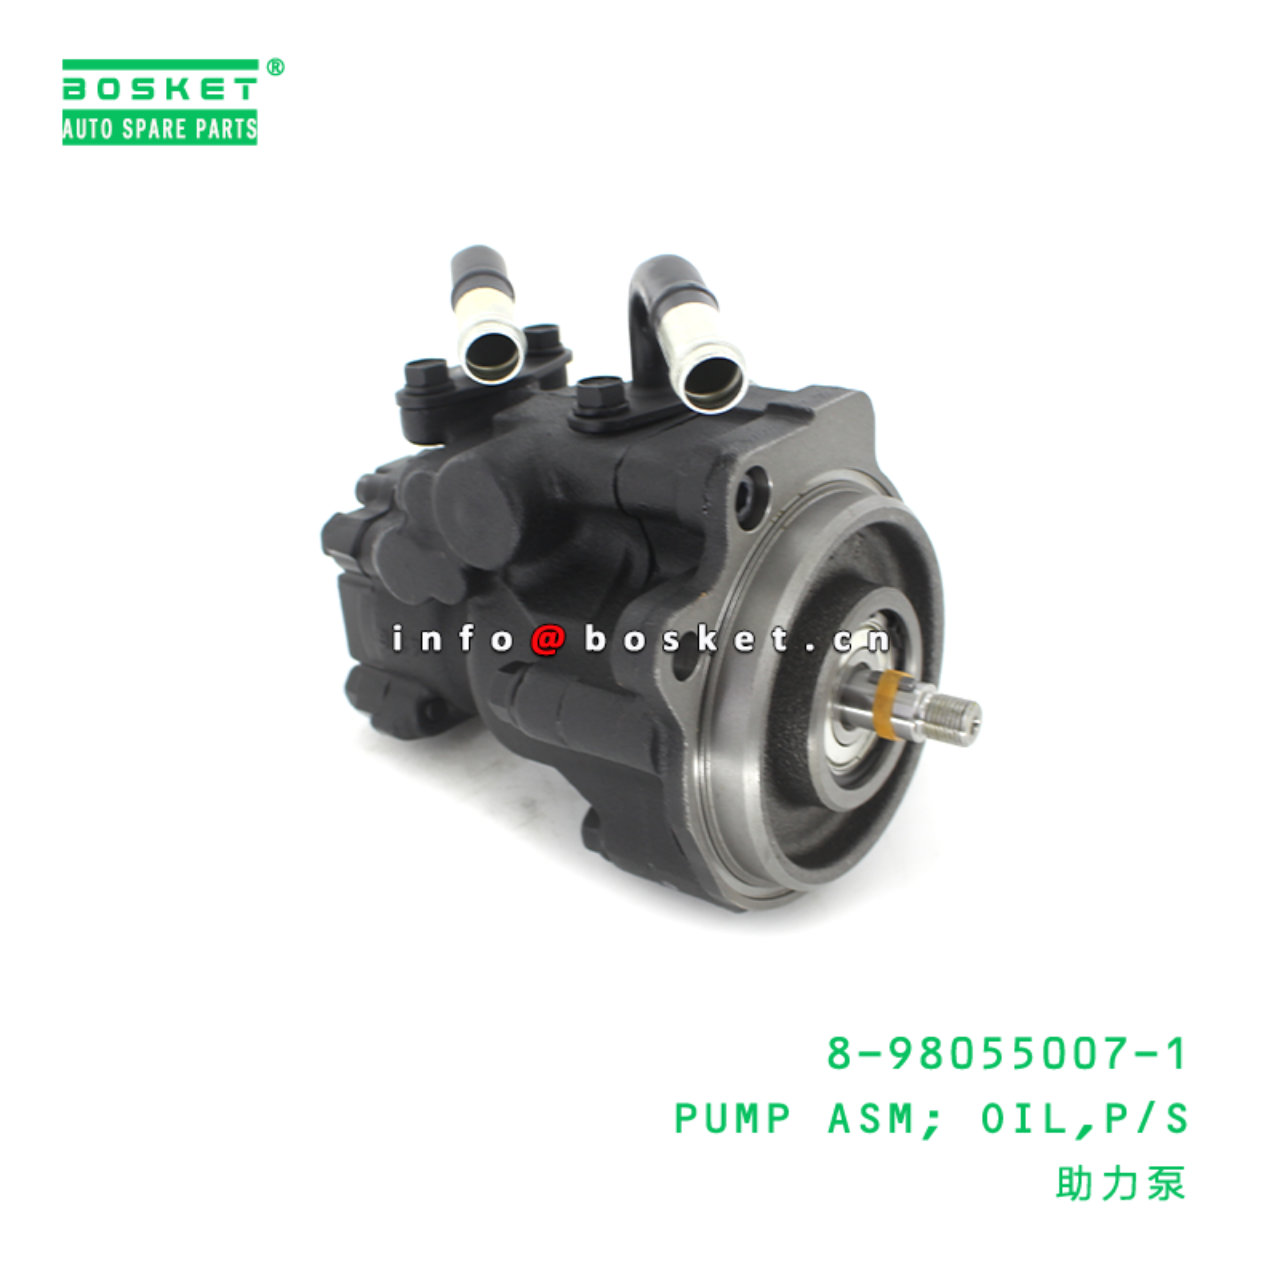 8-98055007-1 Power Steering Oil Pump Assembly Suitable for ISUZU NPR 8980550071